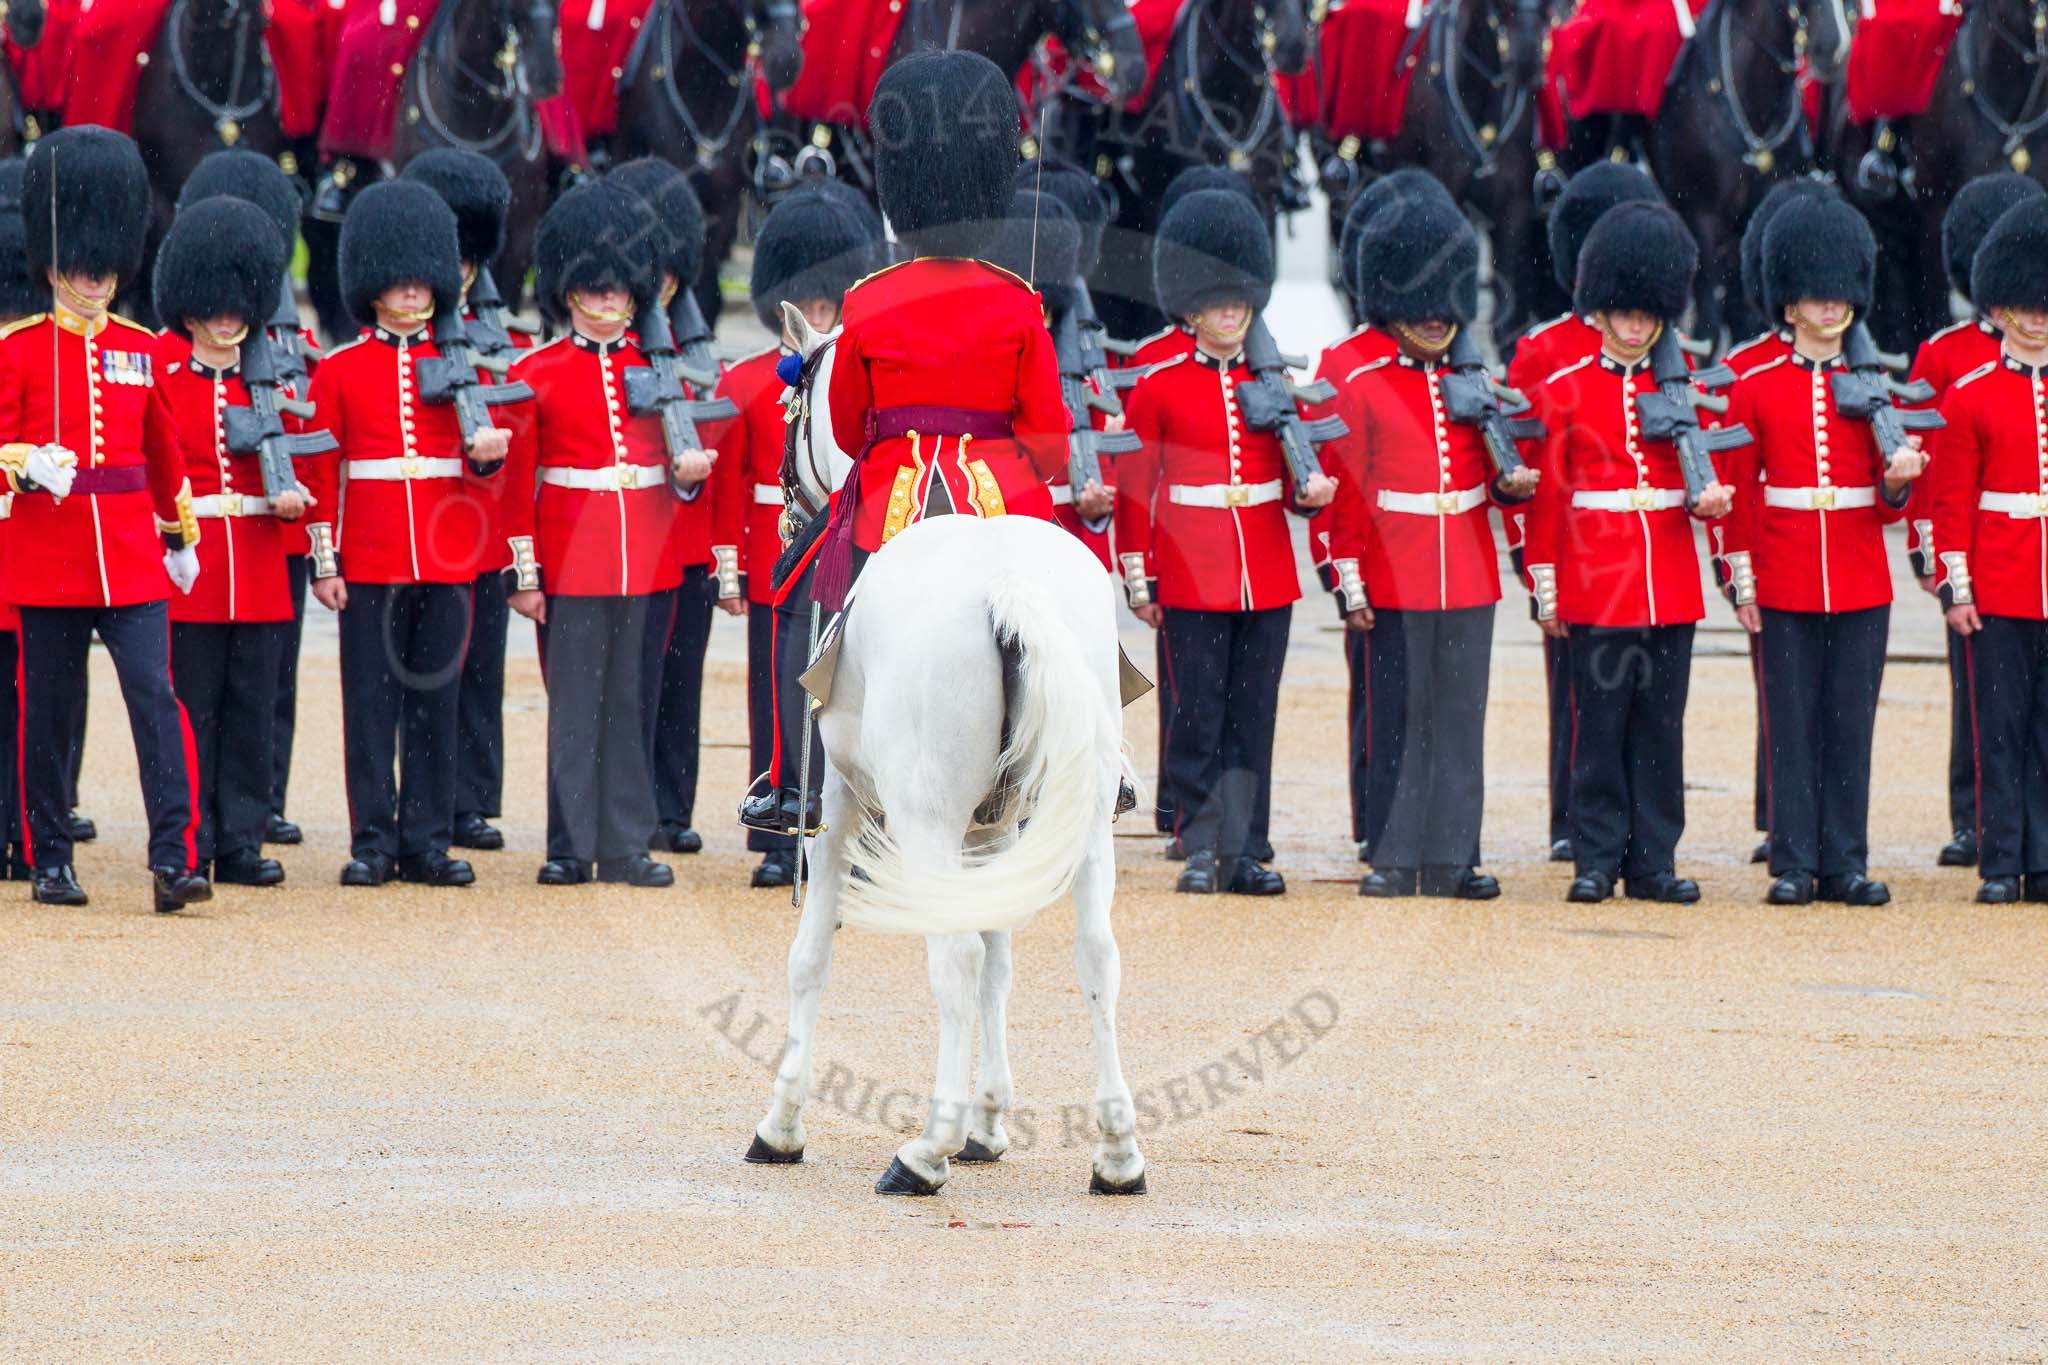 The Colonel's Review 2014.
Horse Guards Parade, Westminster,
London,

United Kingdom,
on 07 June 2014 at 11:27, image #451